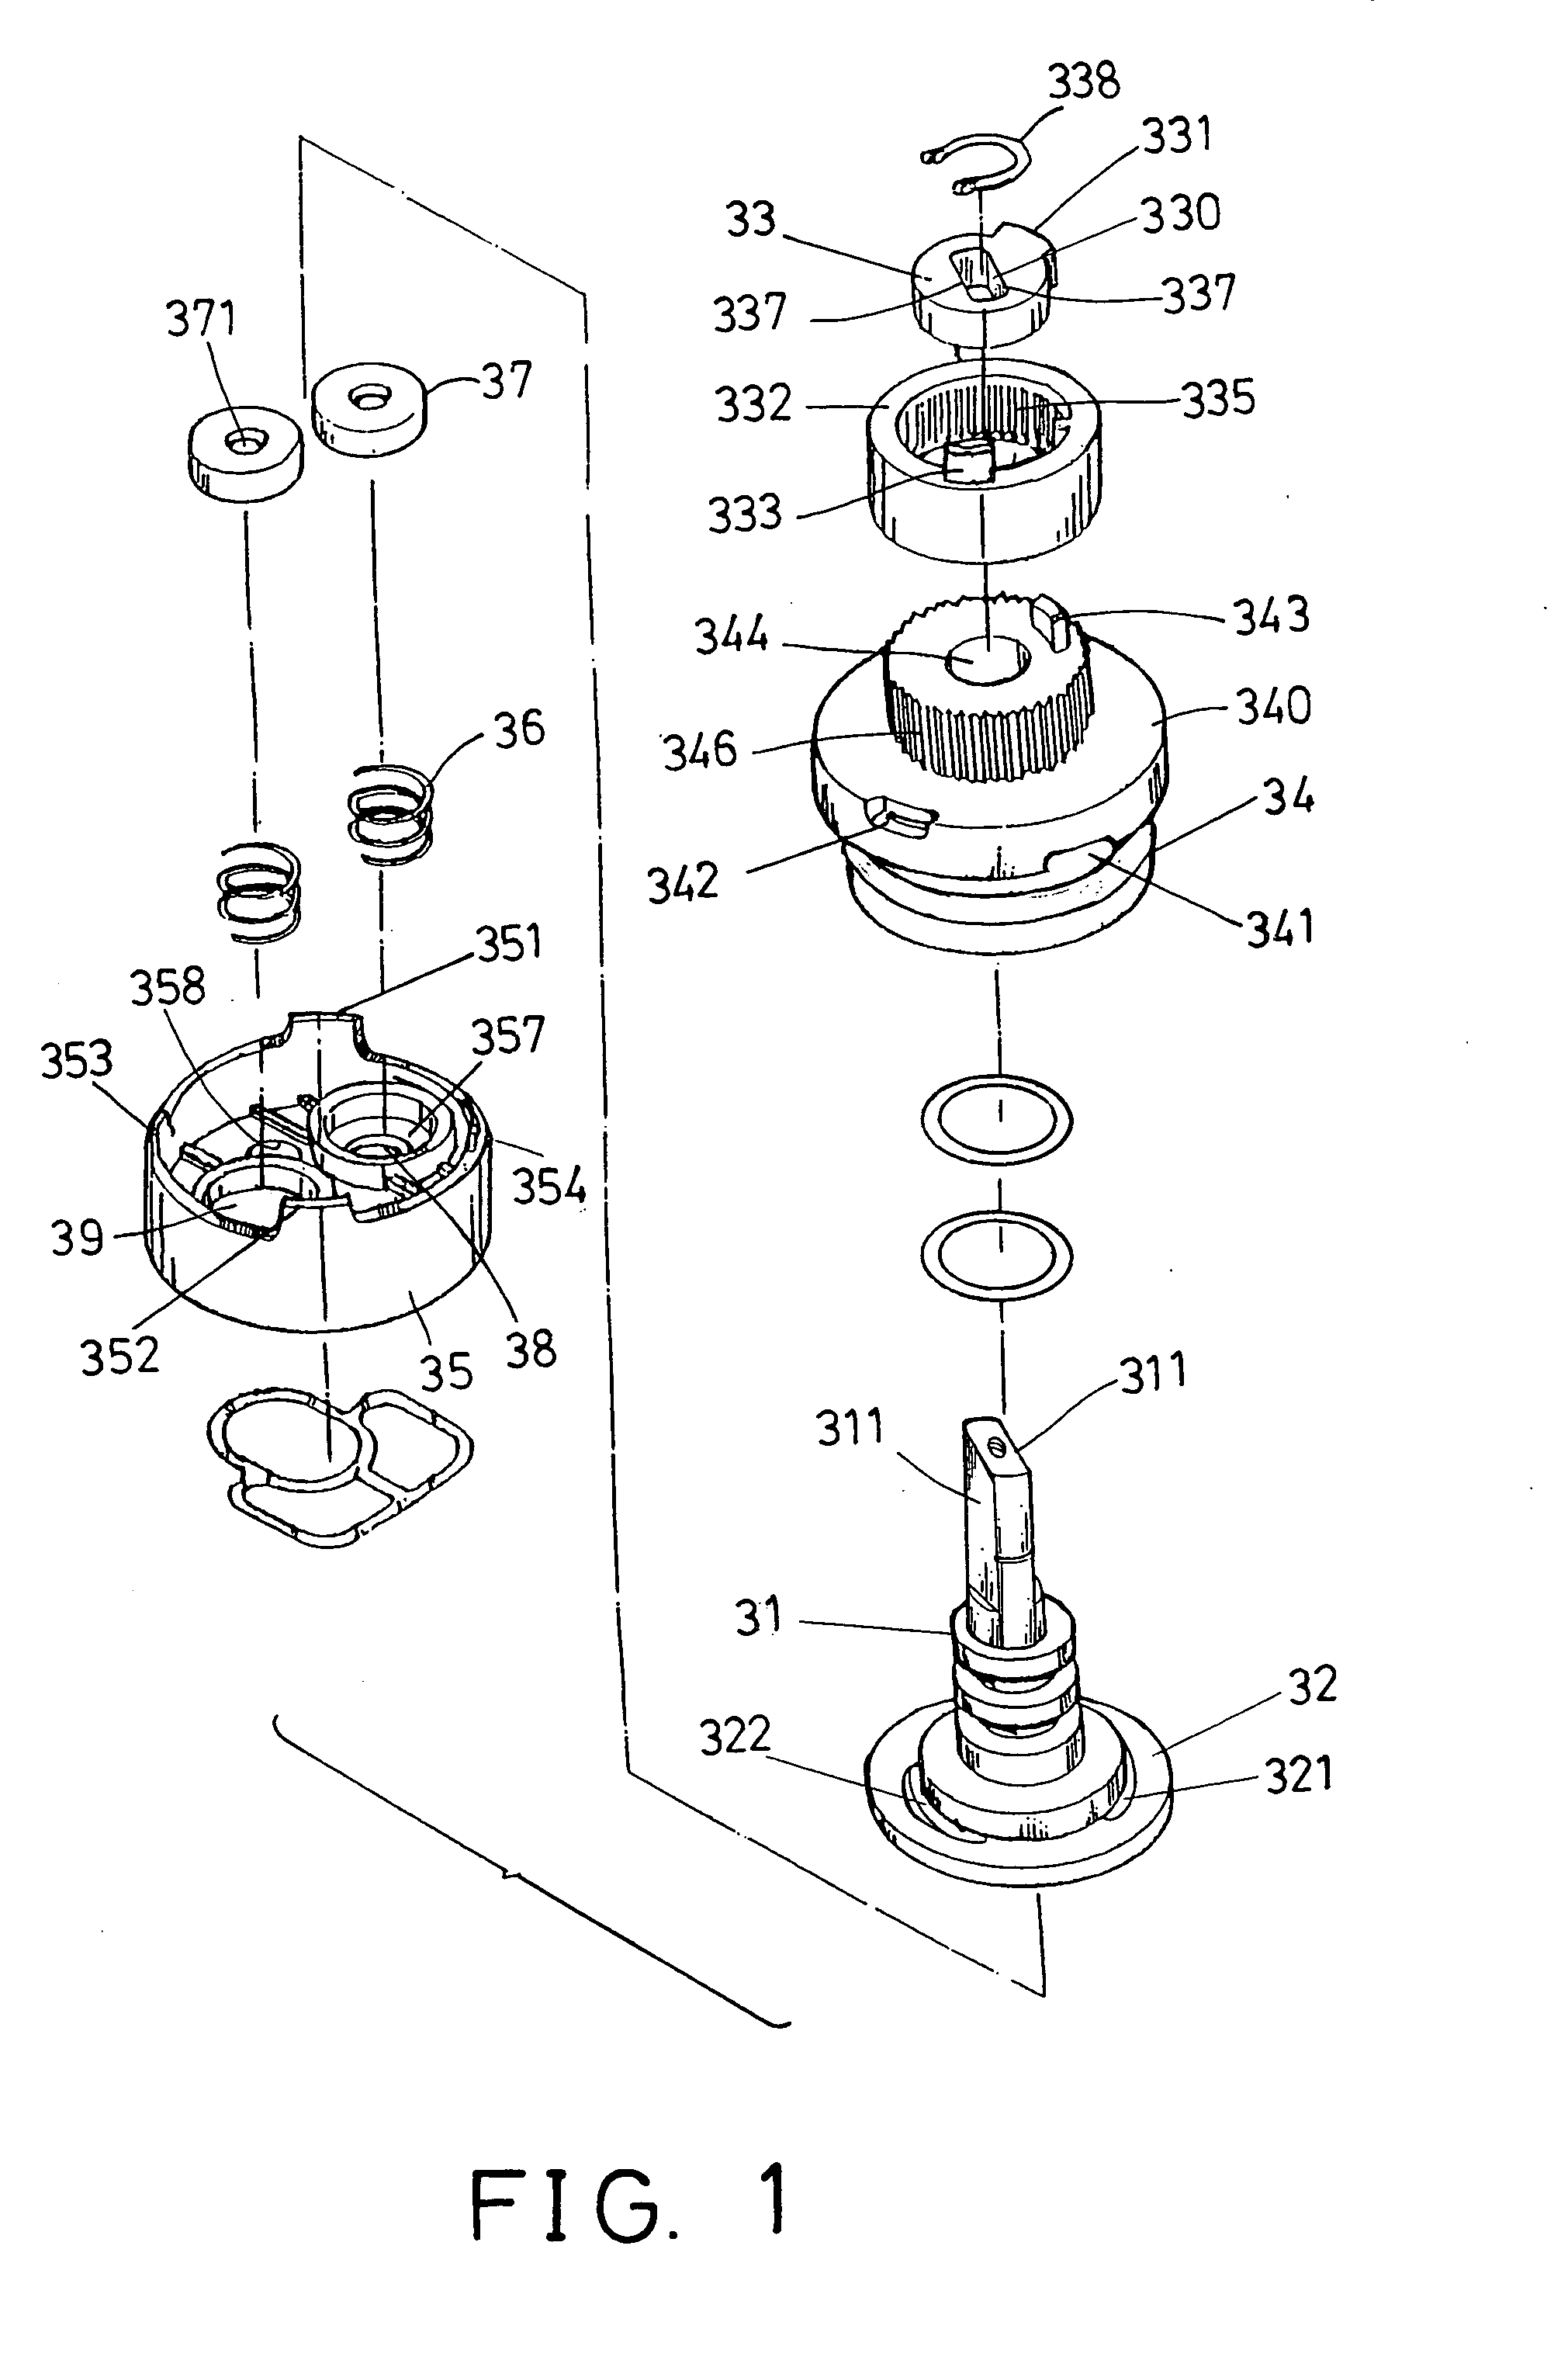 Valve for mixing cold and hot water